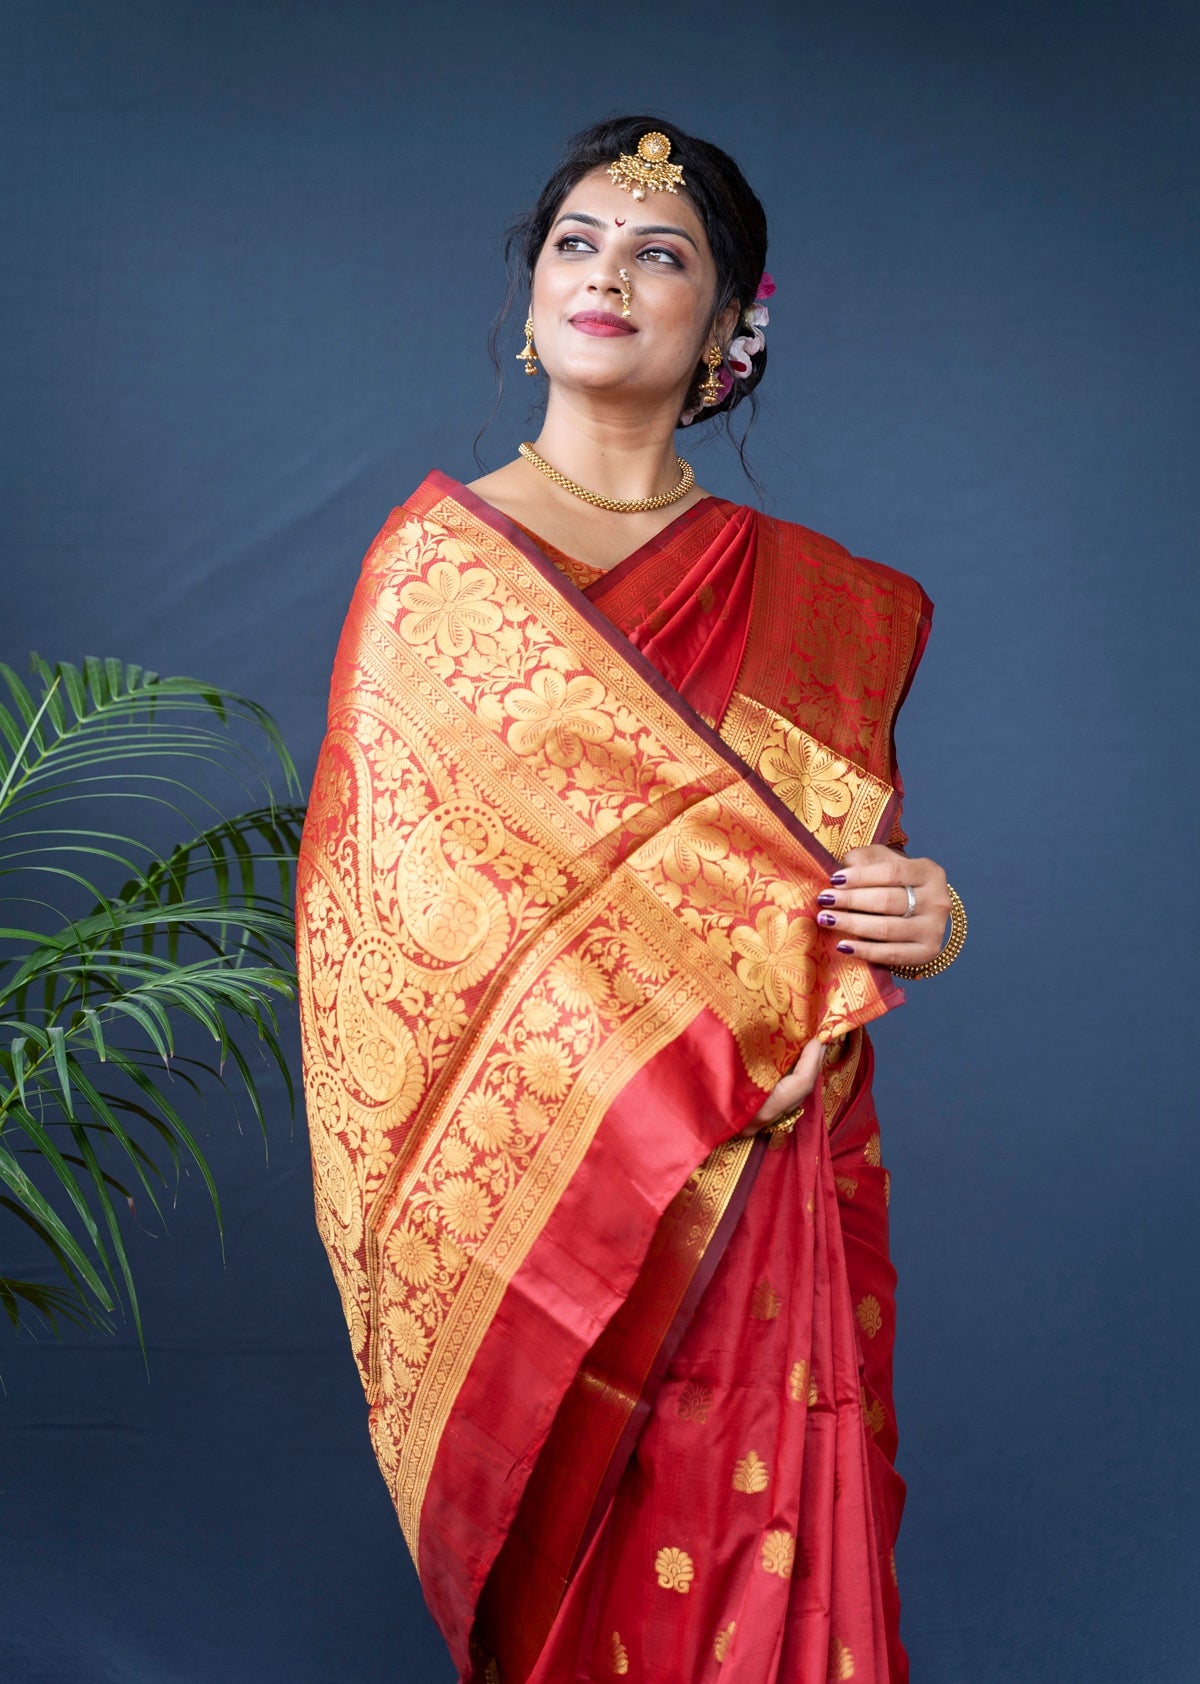 Fancifull Red Banarasi Silk Saree With Assemblage Blouse Piece